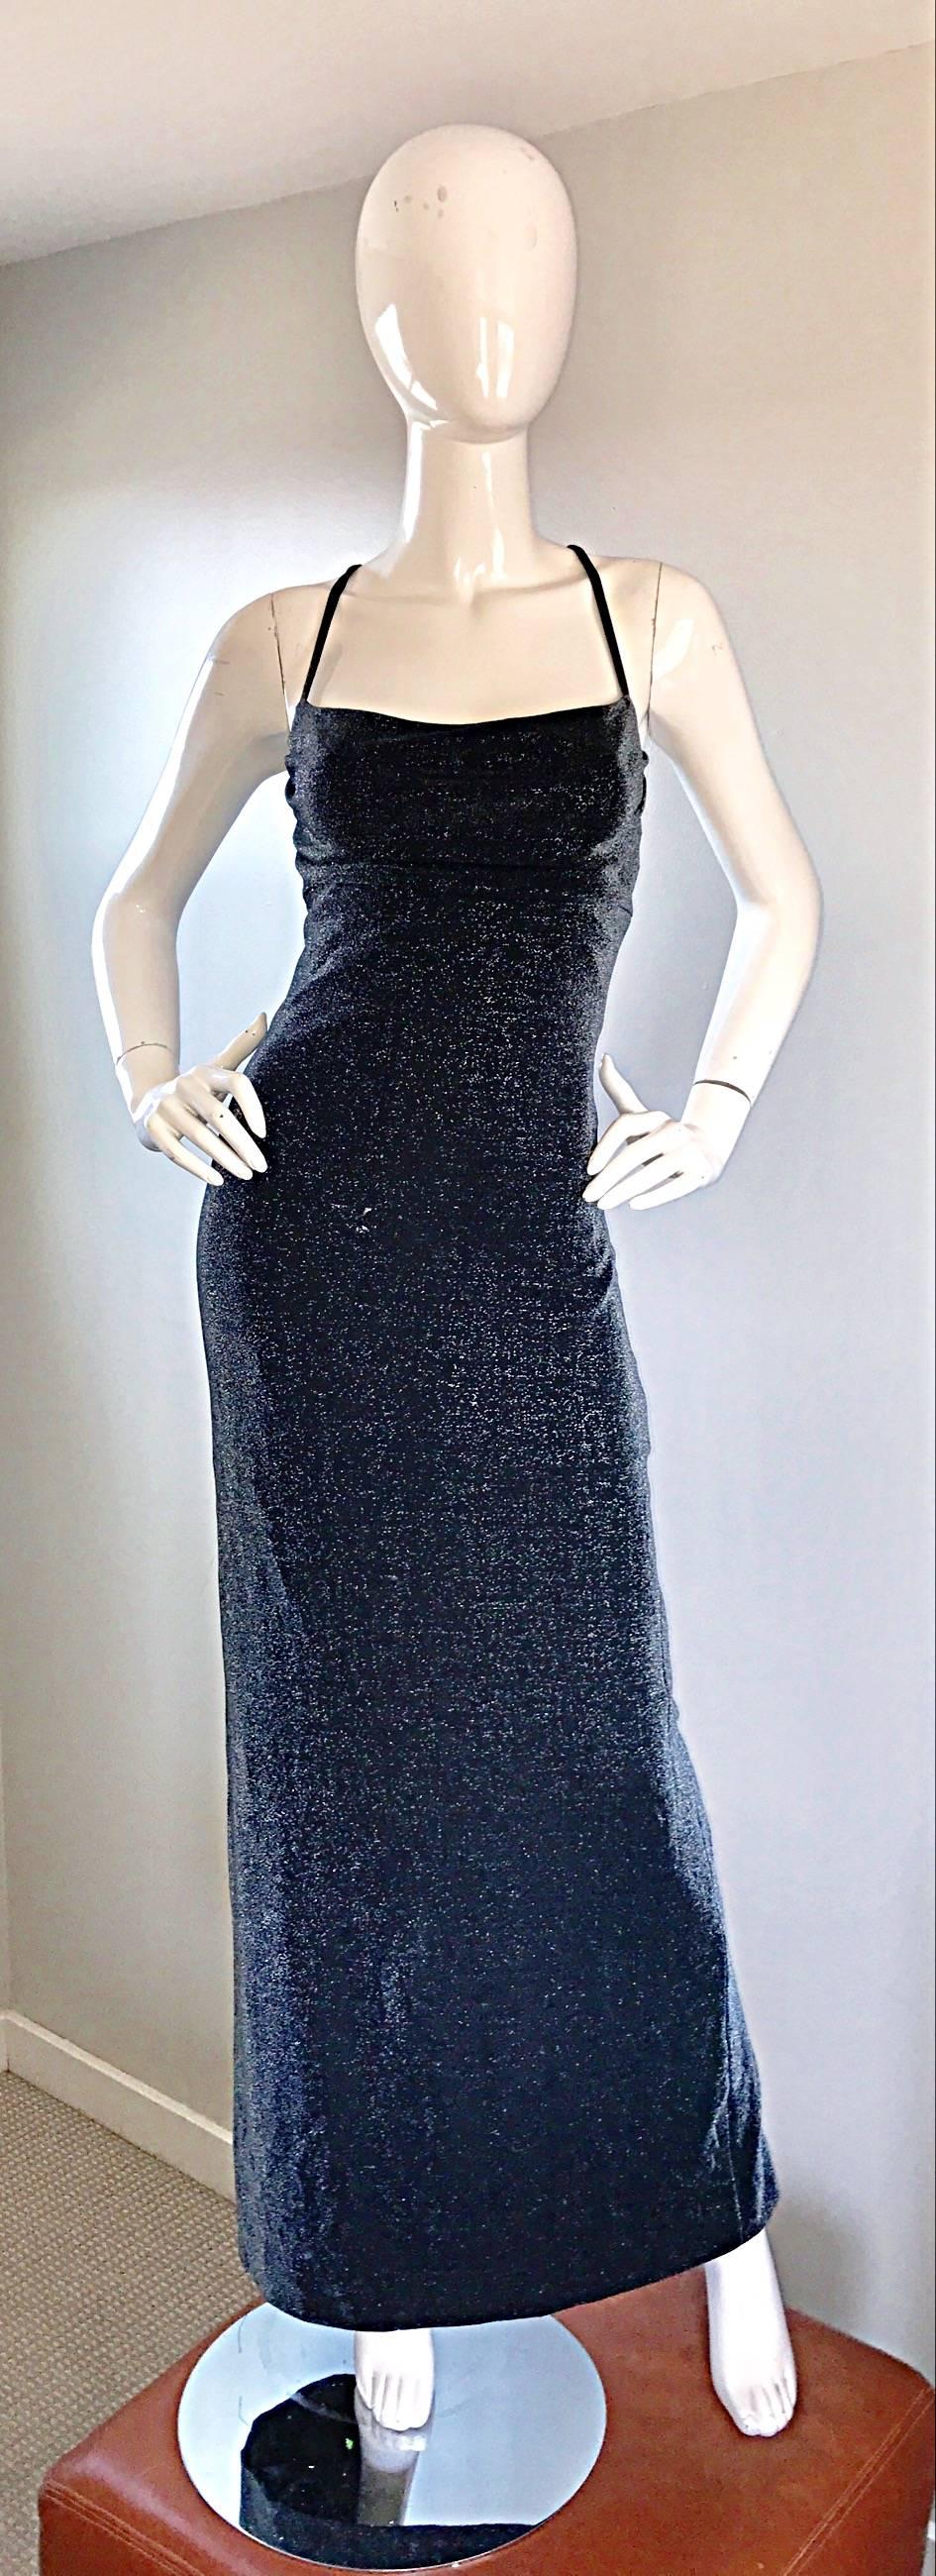 Sexy vintage early 1990s GIANNI VERSACE metallic gray / gunmetal full length bodcon evening dress! Insanely flattering fit, with a crisscross back, and daring split up the center back. Grecian like bodice with just the slightest bit of drapery at